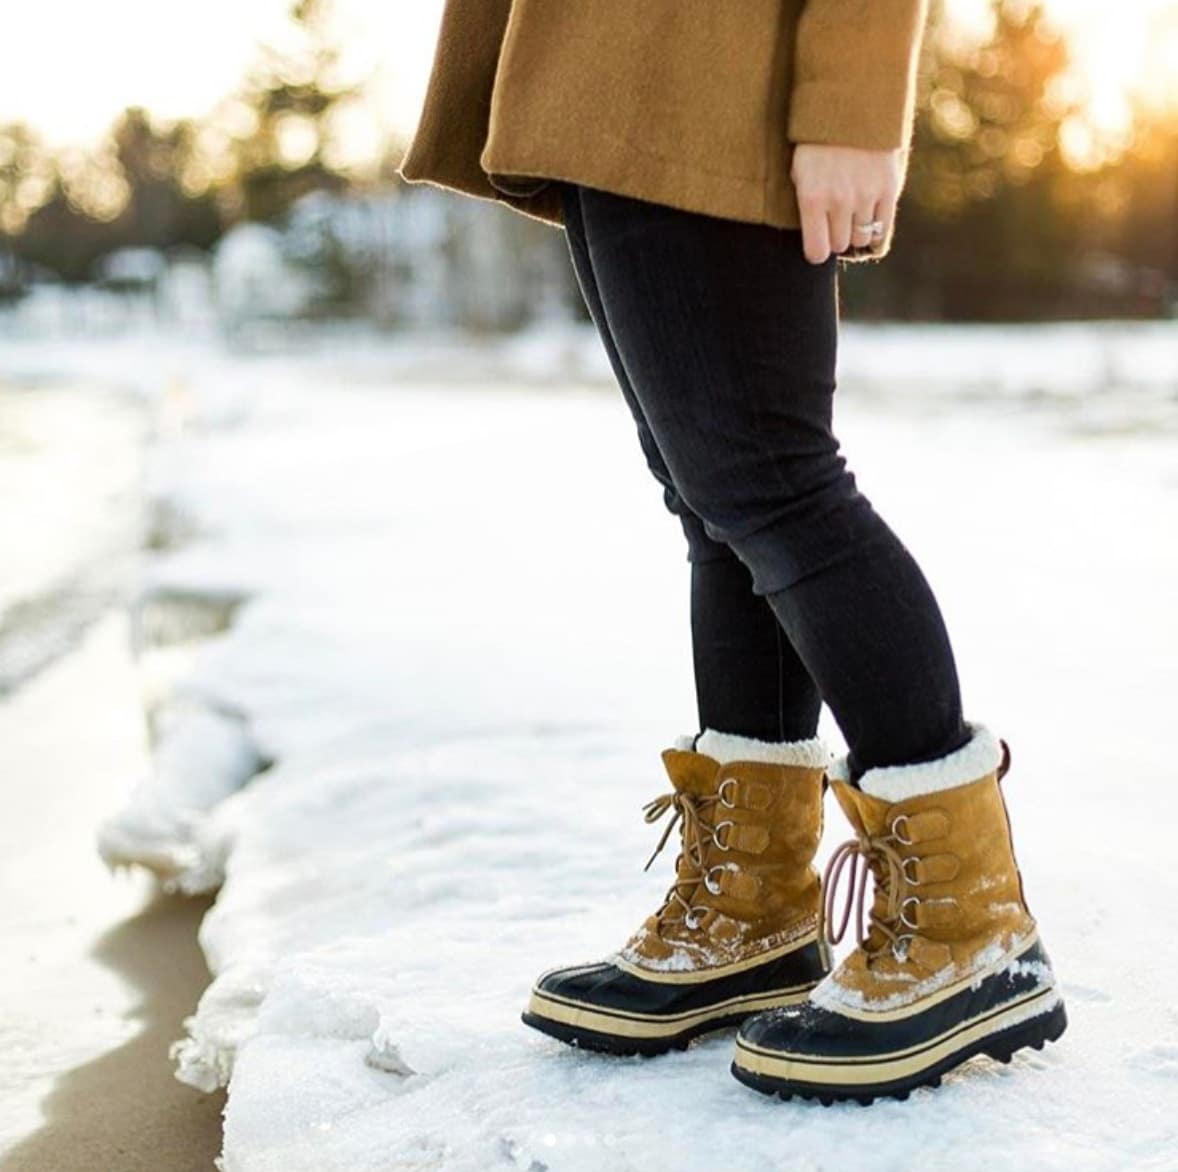 sigaret tanker warm SOREL boots are on sale now: Run, don't walk, mama!